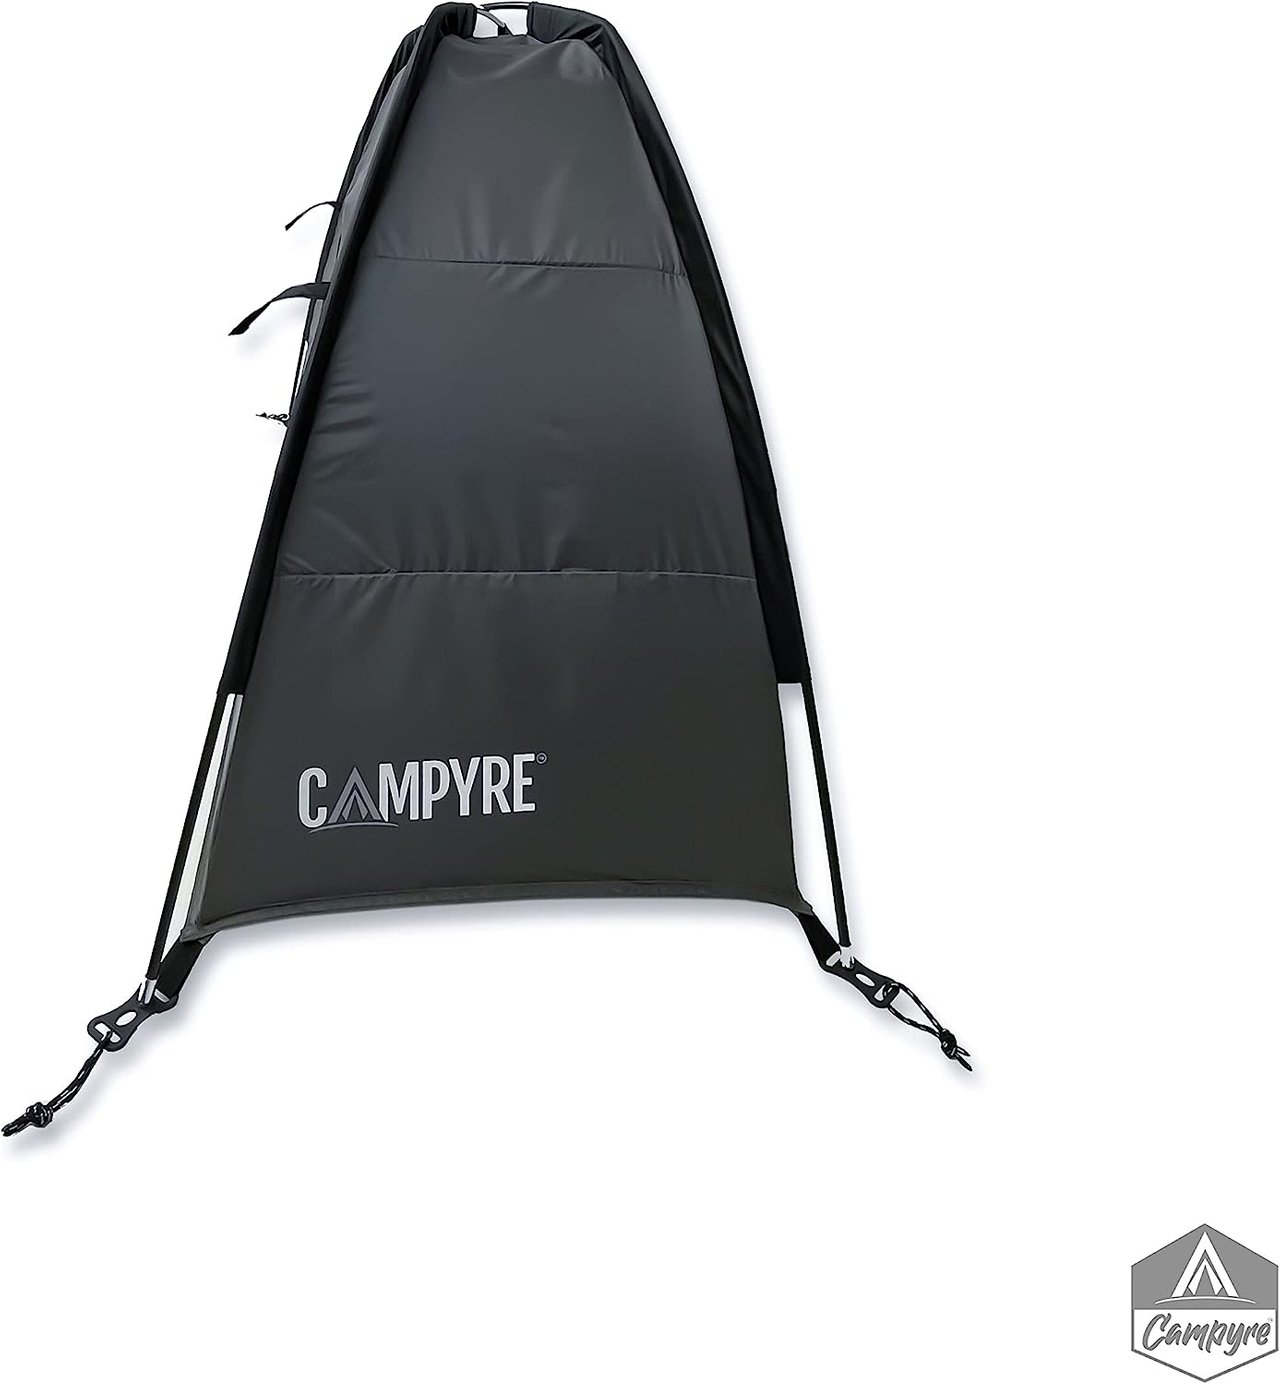 3 CAMPYRE - Compact Camping Organizer with Zippered Flap, 9-Shelf Storage. Ideal for Tent, RV, or any Outdoor Gear Organization (Patented - Licensed)